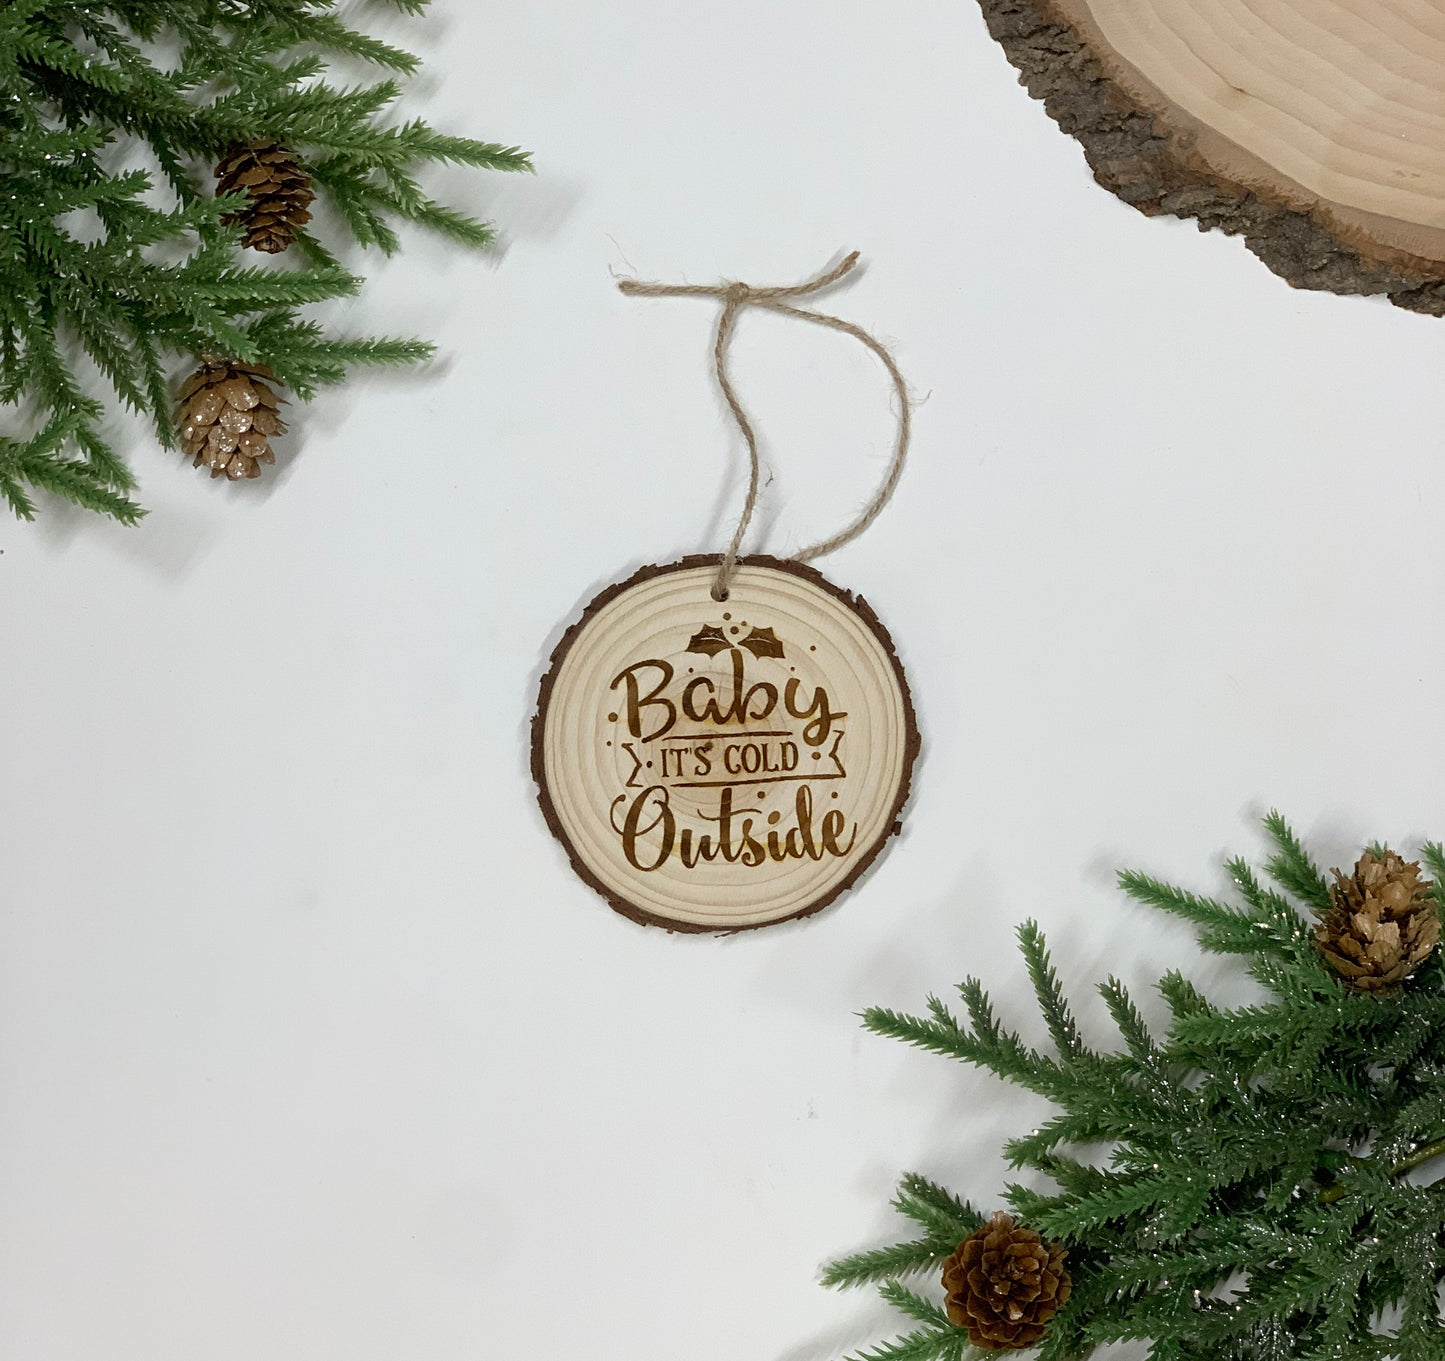 Baby it’s Cold Outside Christmas Ornament